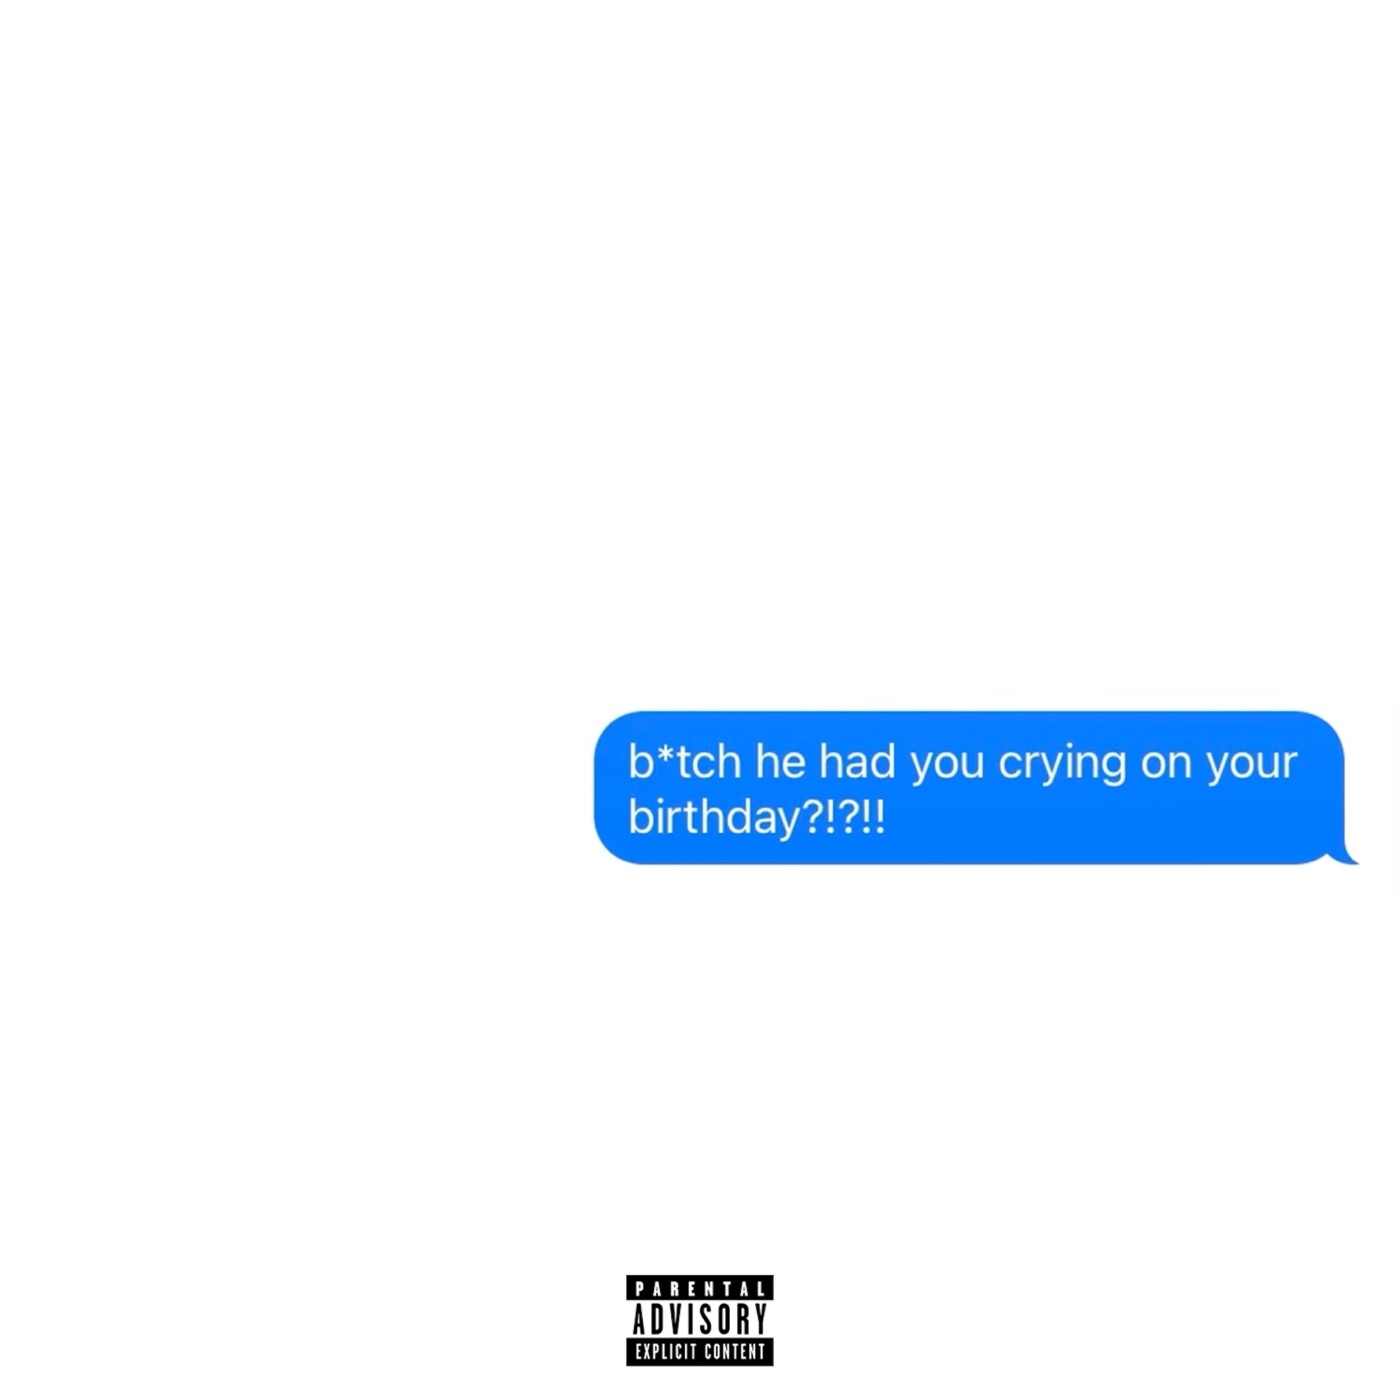 Monaleo Drops Savage Track “Crying On Your Birthday”